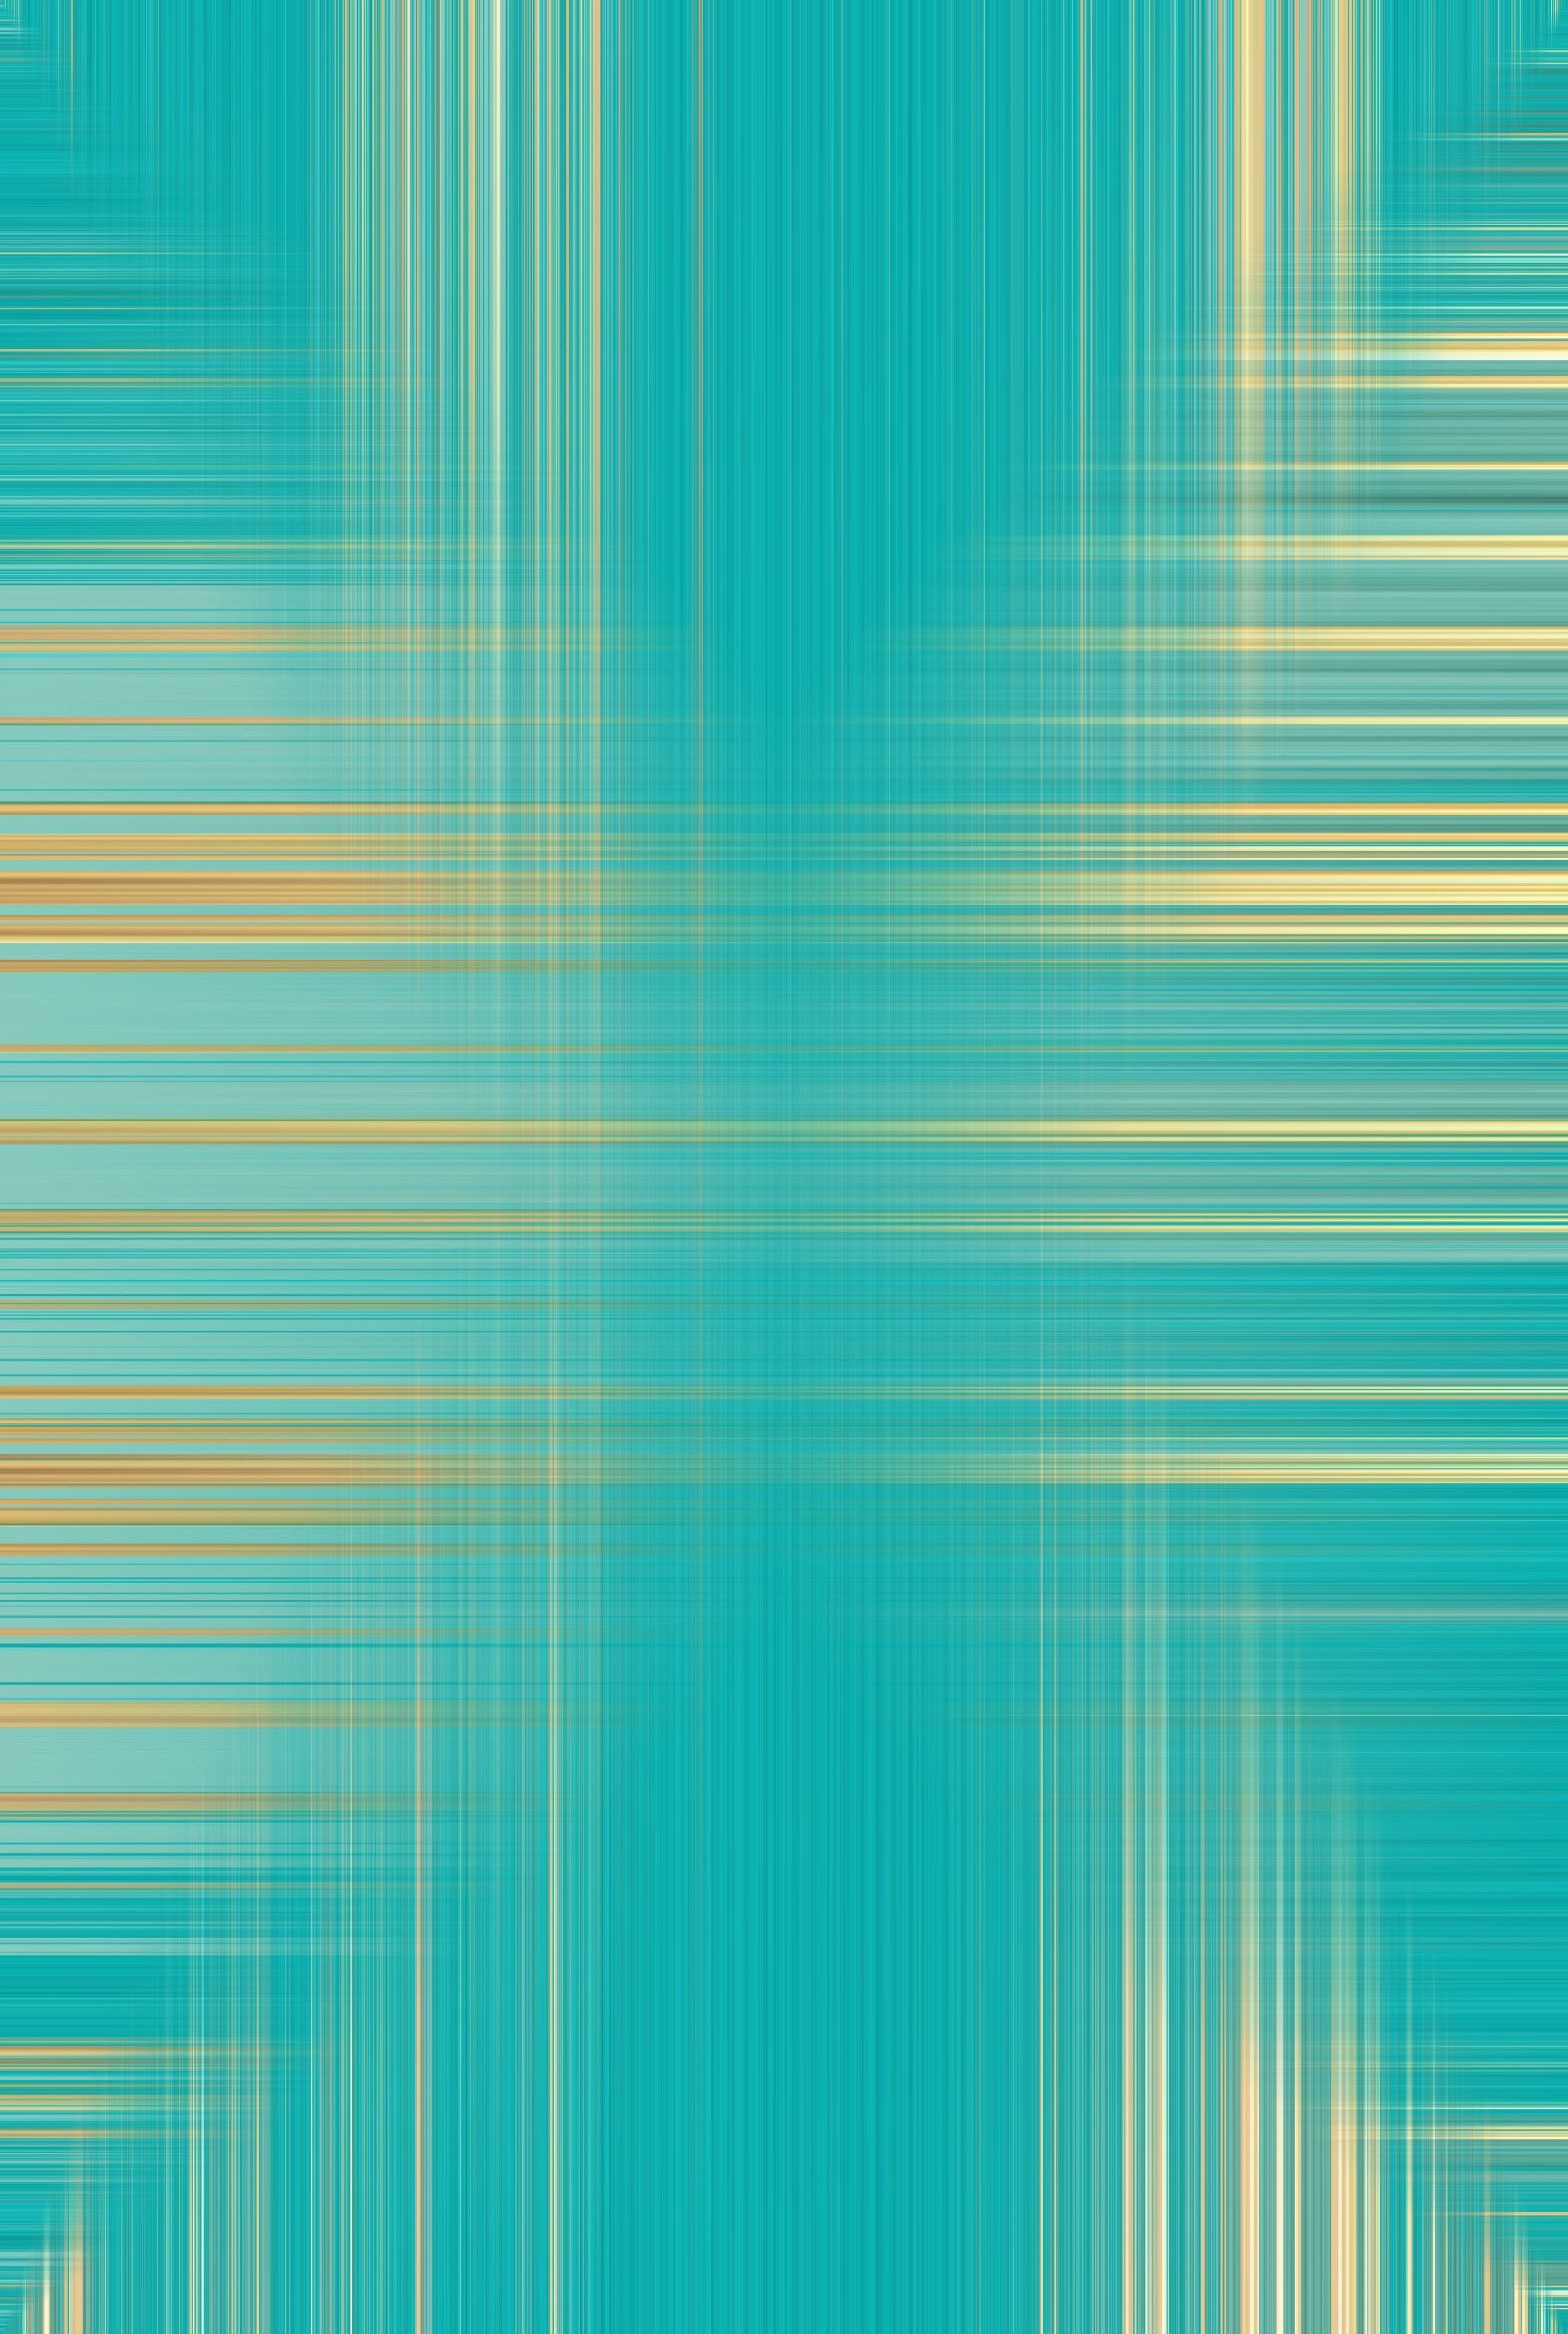 lines, graphics, textures, texture, stripes, turquoise, streaks Aesthetic wallpaper